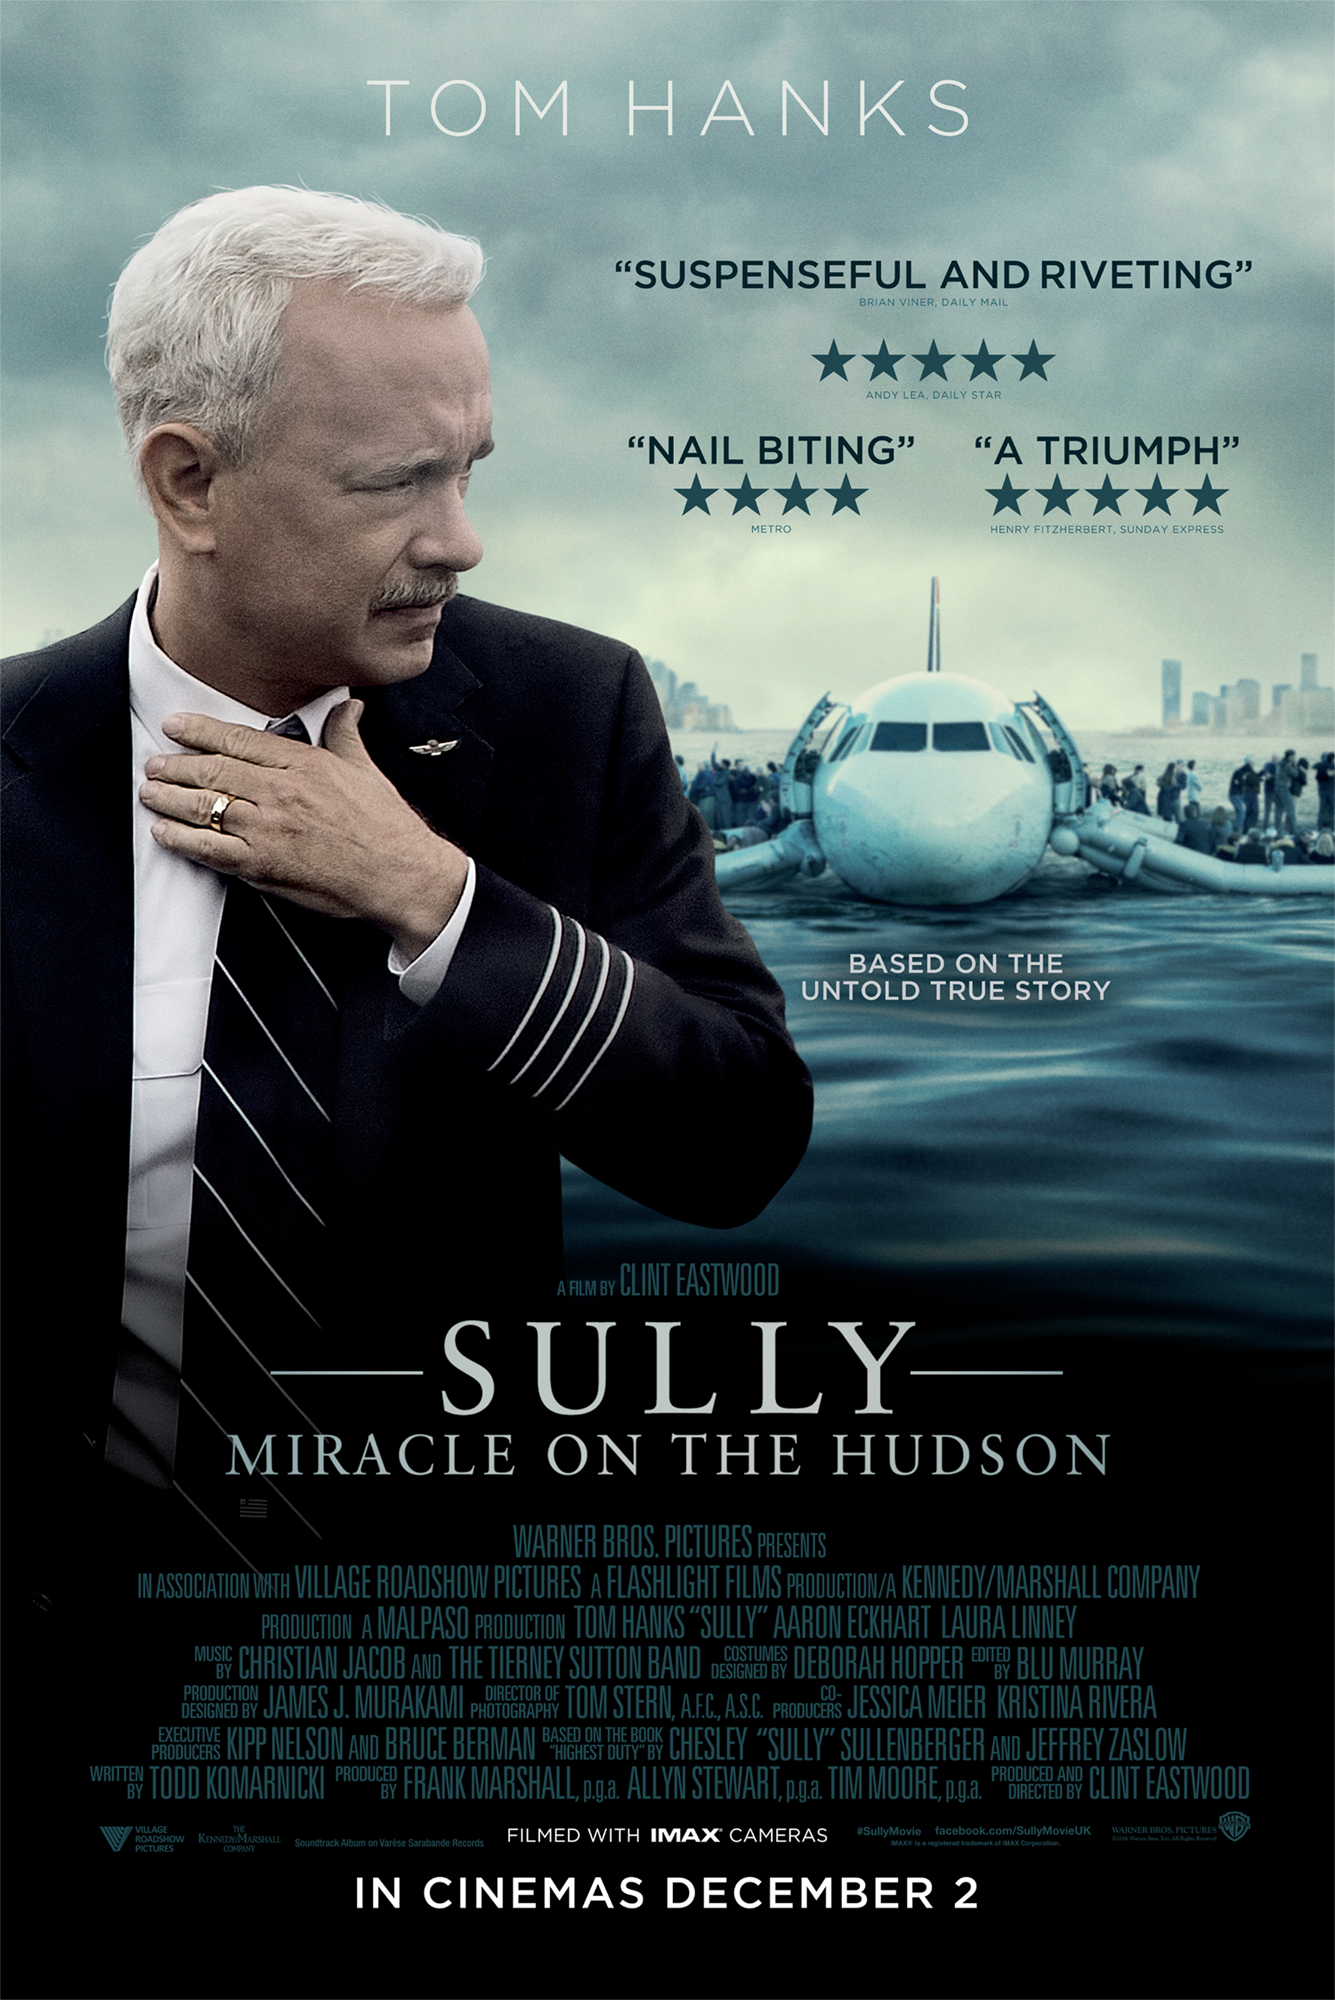 SULLY: MIRACLE ON THE HUDSON TRAILER